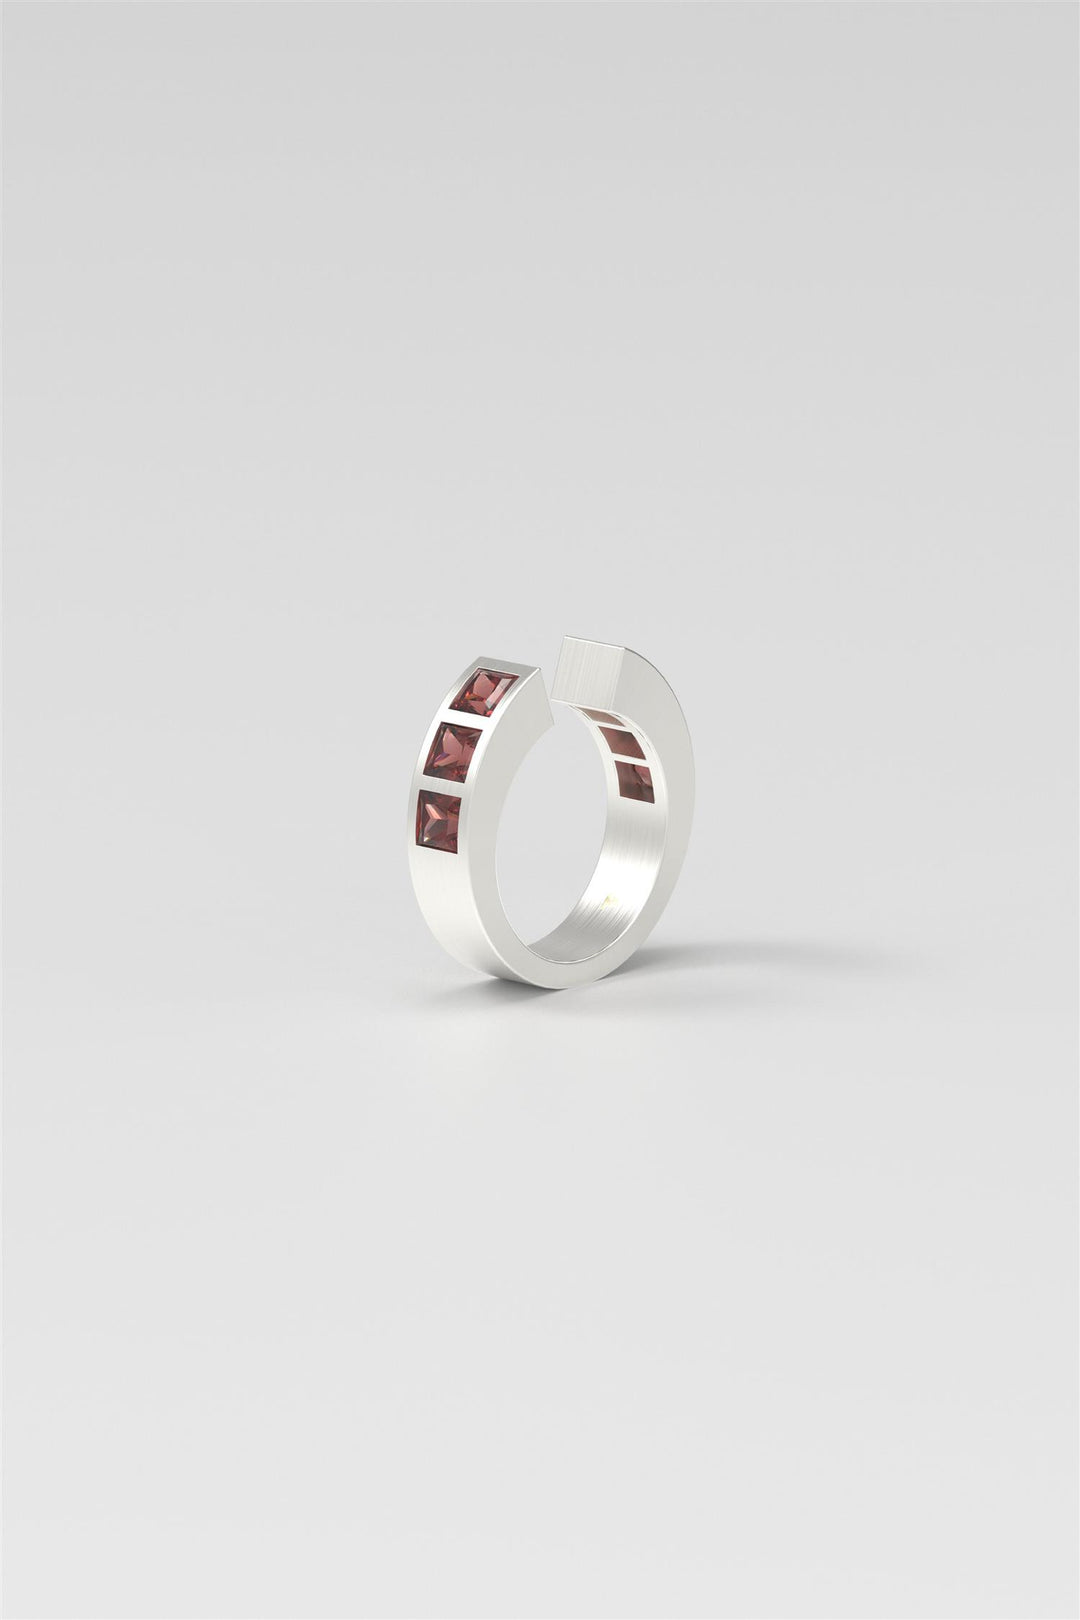 Gate Square Red Garnet Ring Silver